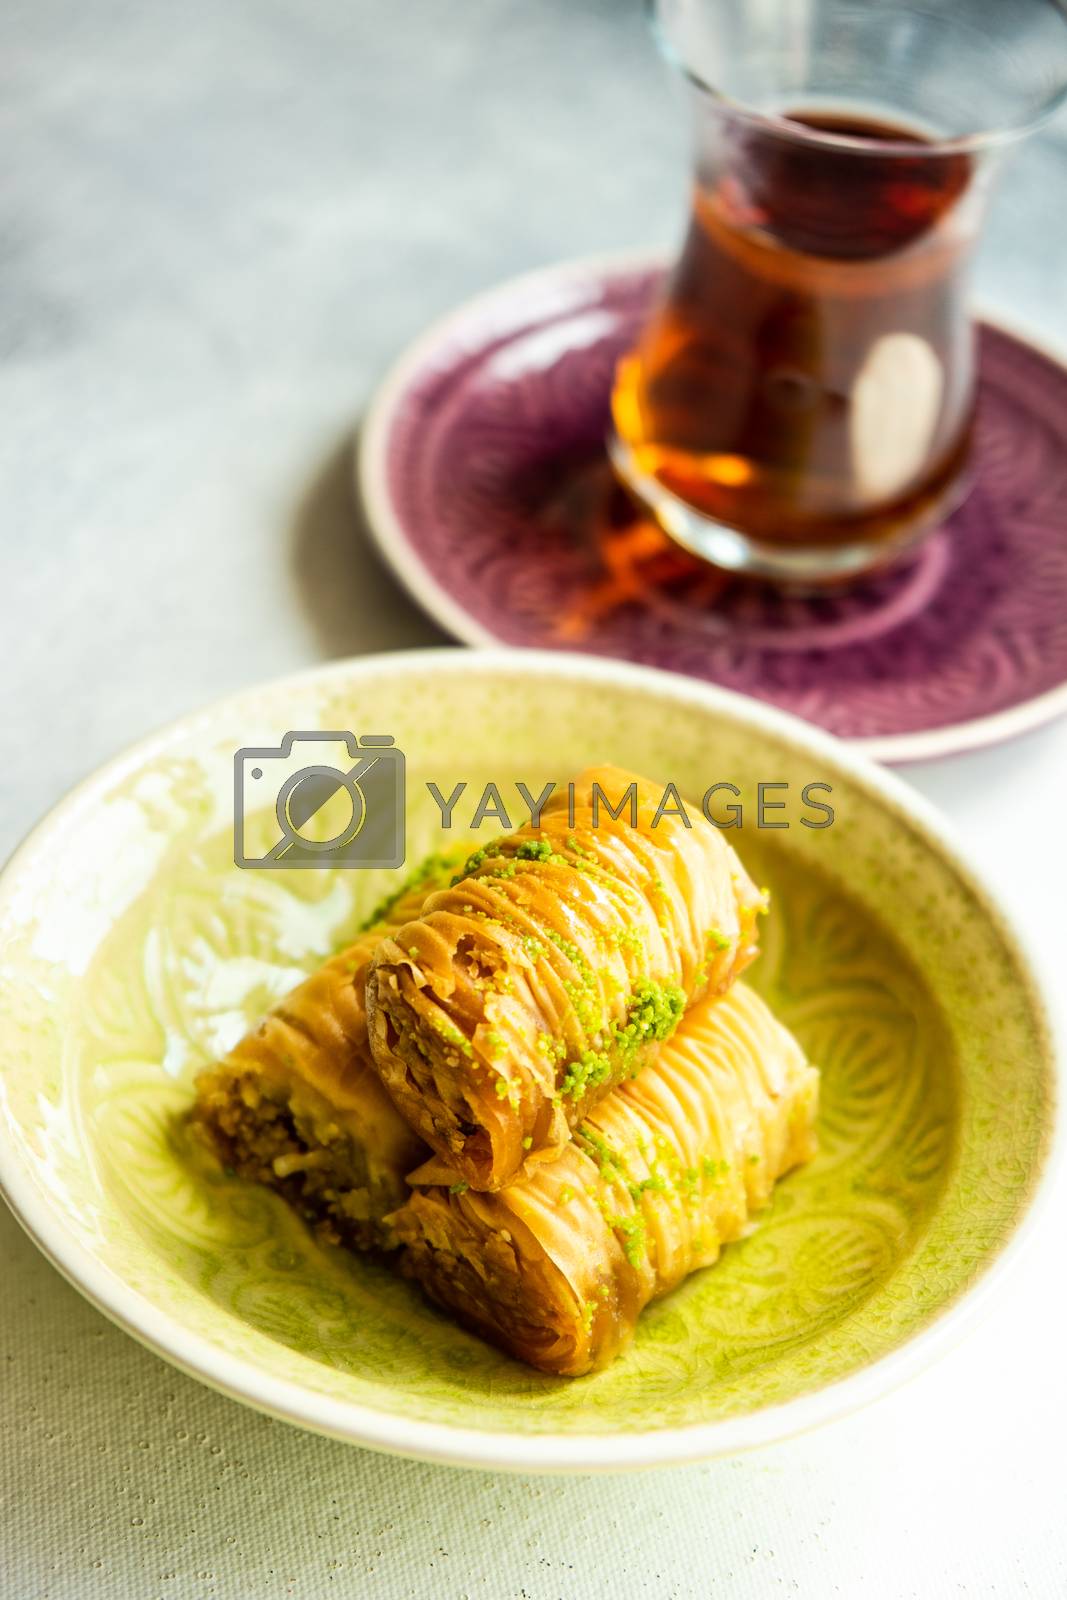 Royalty free image of Famous turkish sweet baklava by Elet